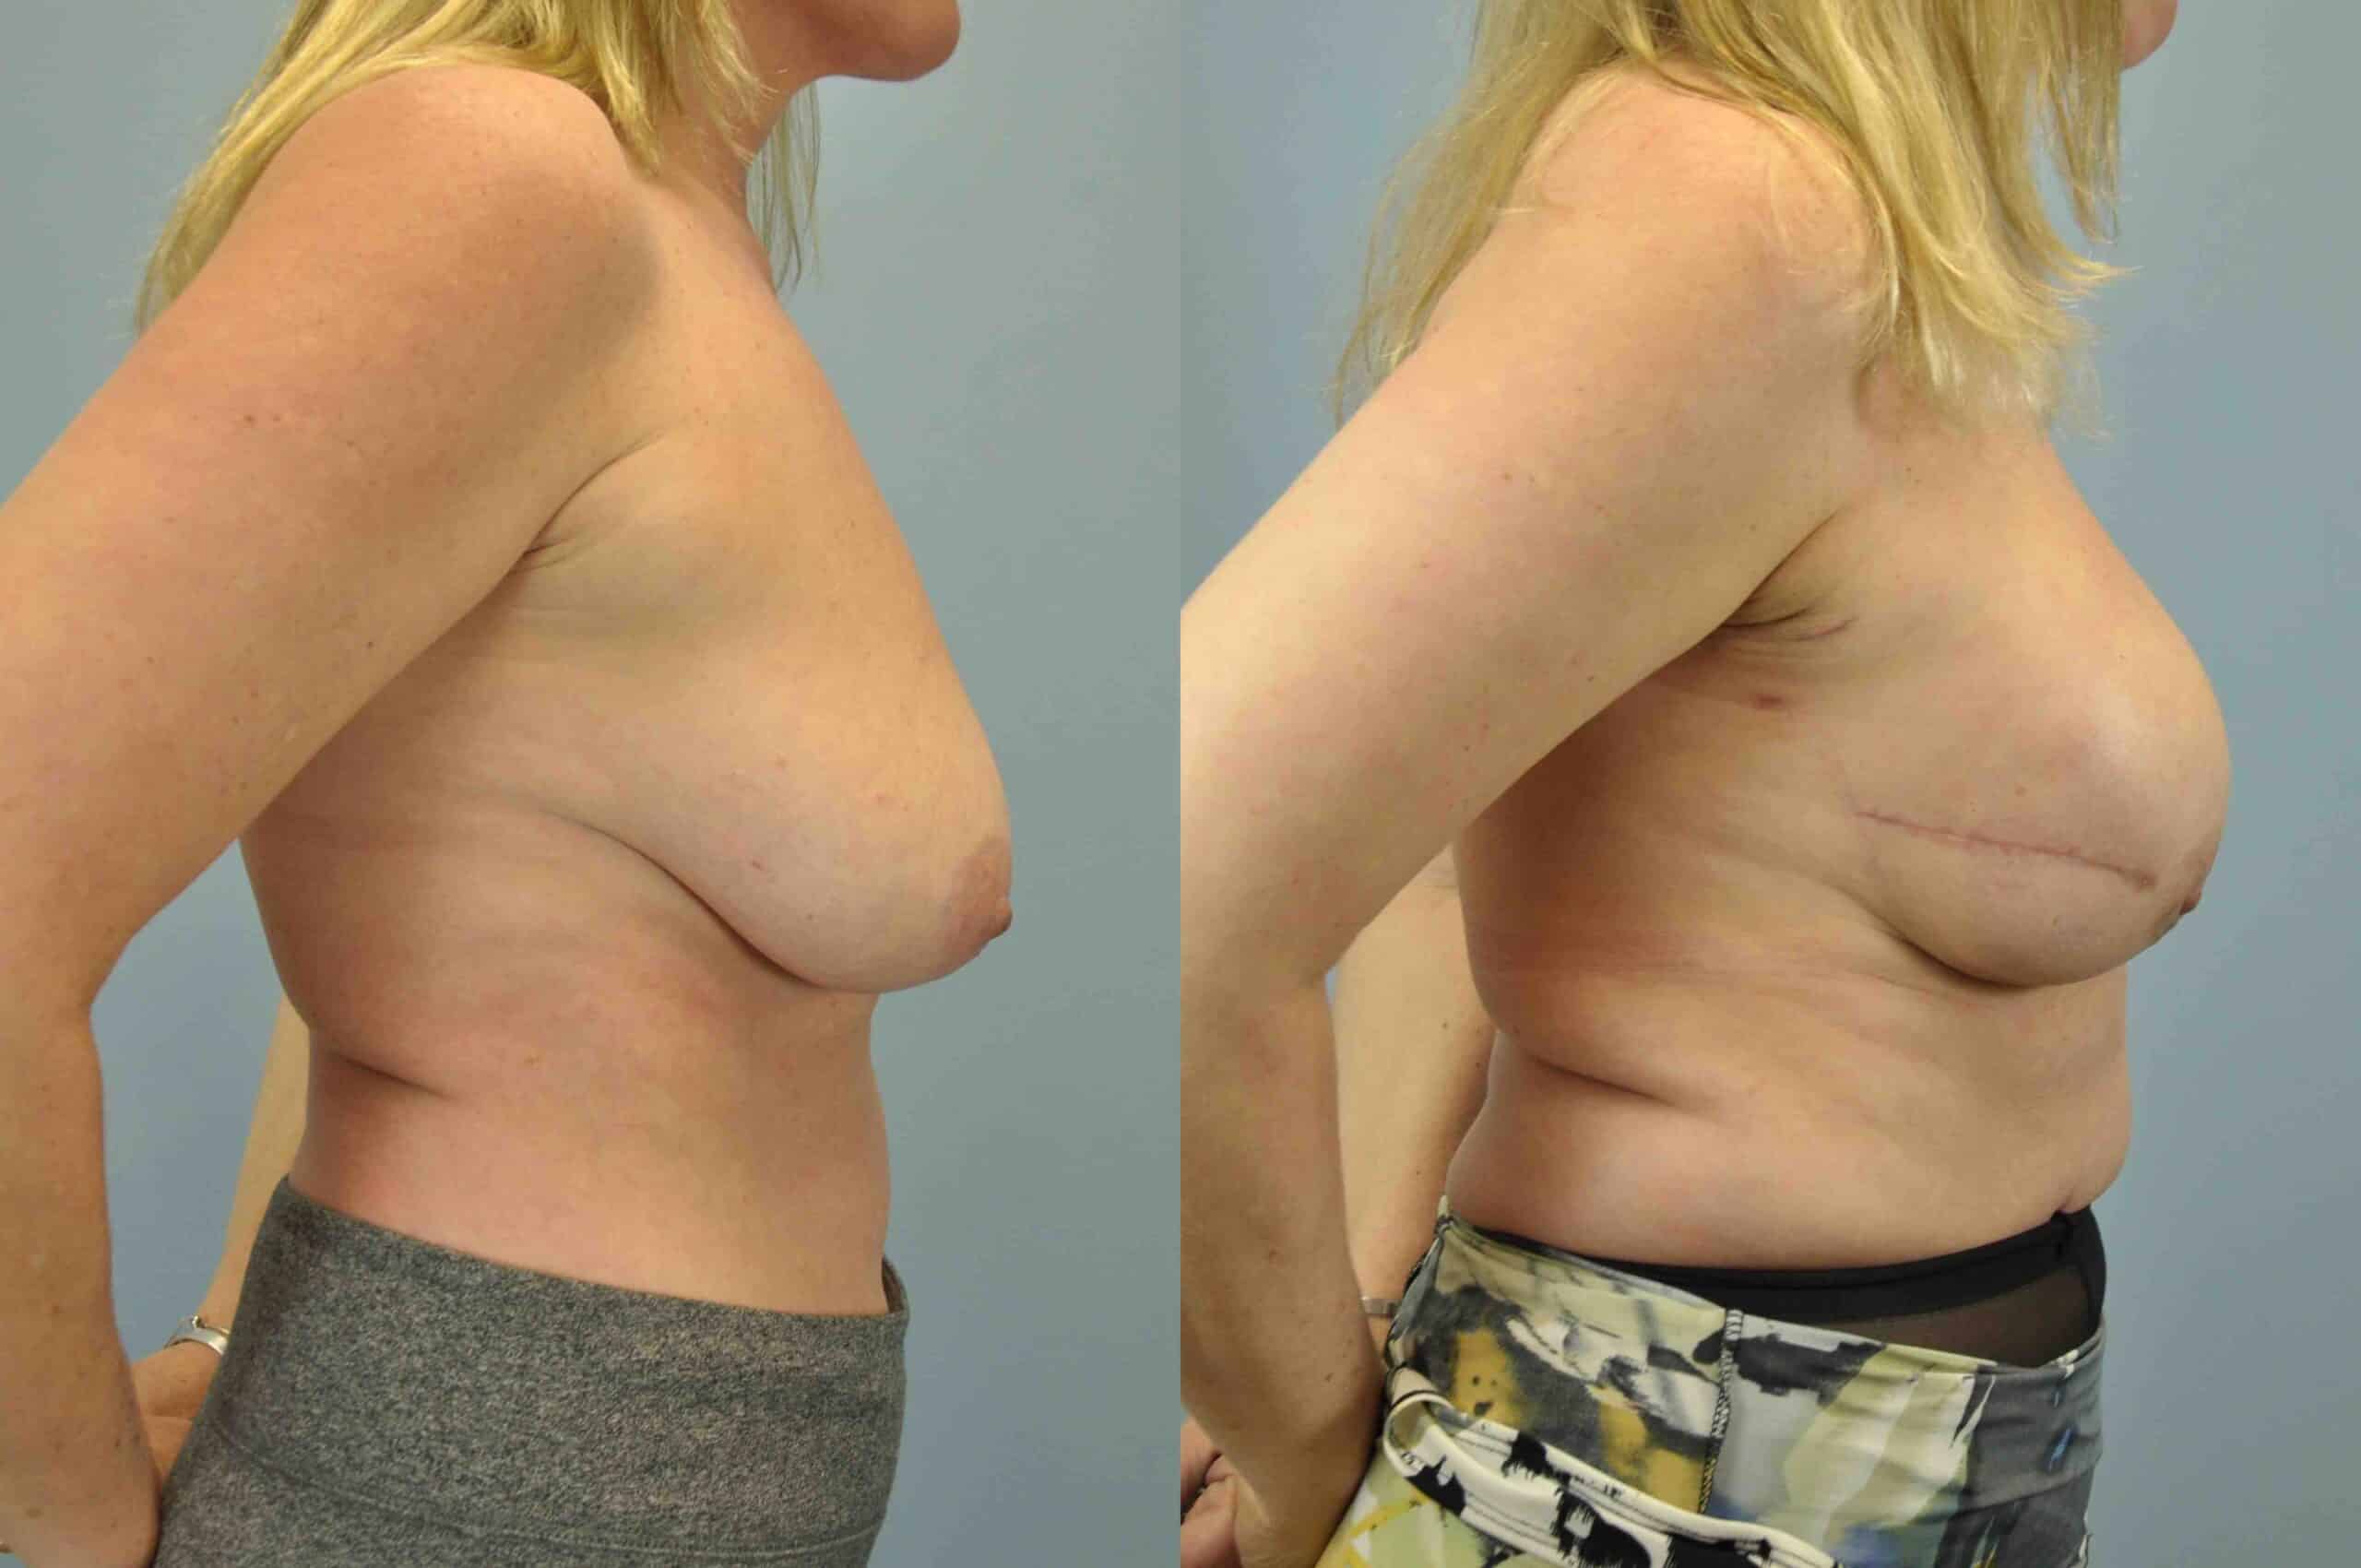 Before and after, 3 mo post op from Single-Stage Breast Reconstruction with Implant, B/L Nipple-Sparing Mastectomy, Alloderm performed by Dr. Paul Vanek (side view)